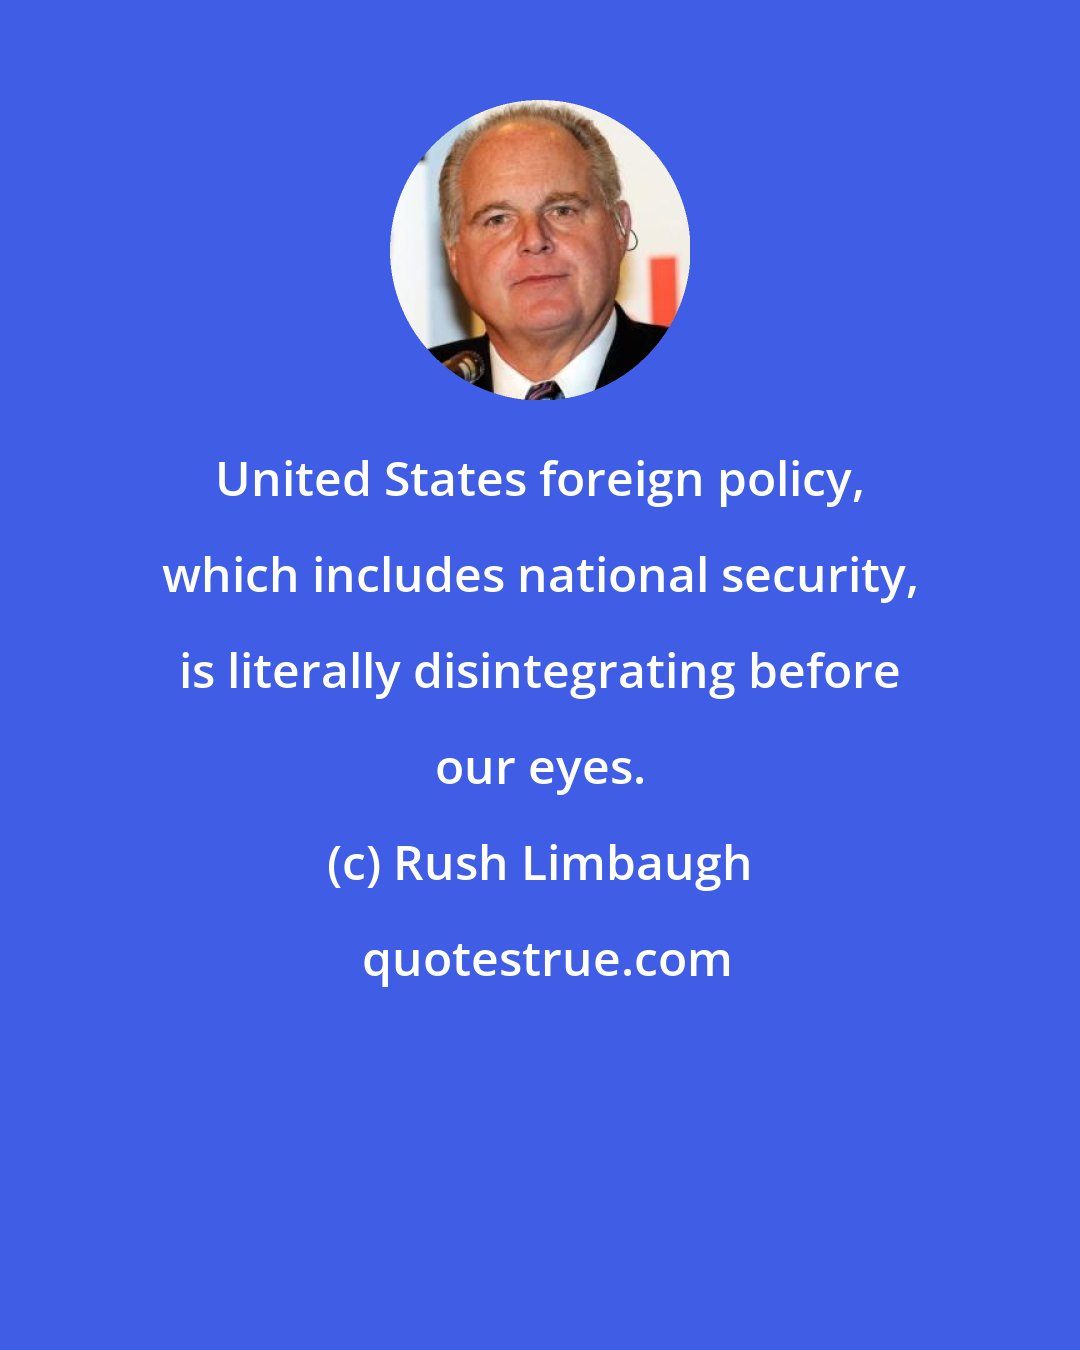 Rush Limbaugh: United States foreign policy, which includes national security, is literally disintegrating before our eyes.